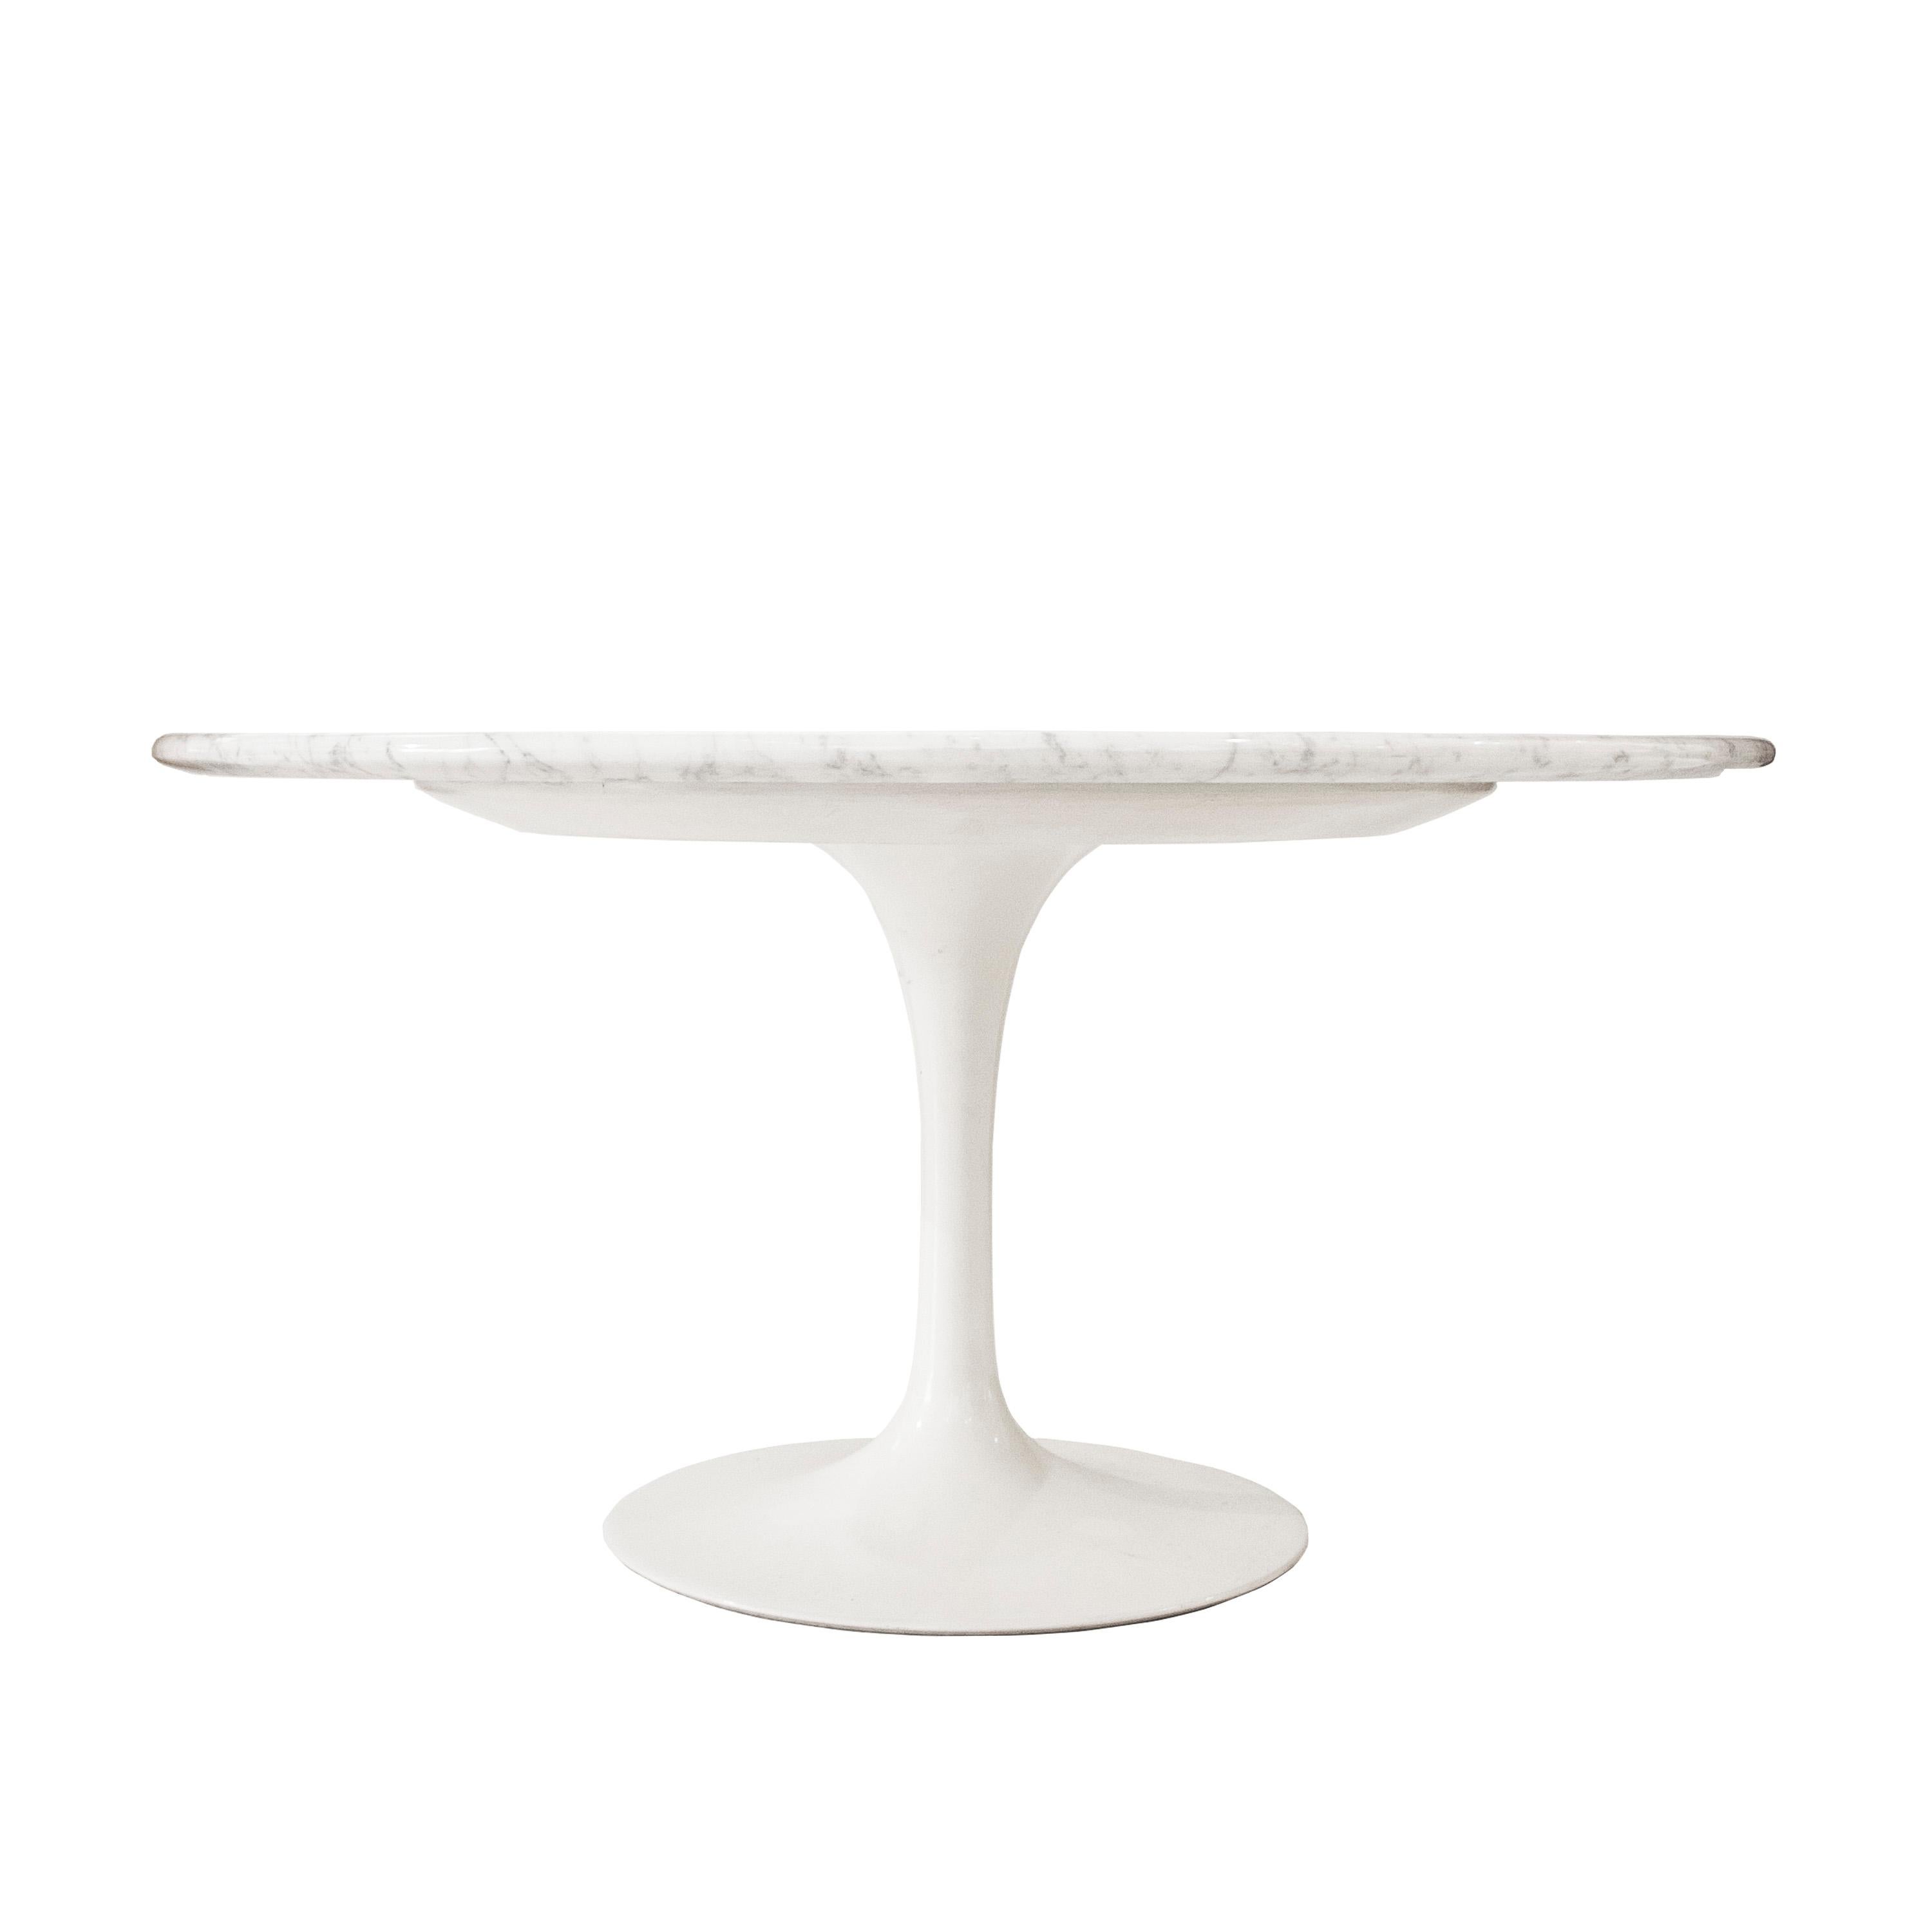 A special “TULIP” side table designed by Eero Saarinen (1910-1961) for Knoll.
Its characteristic foot is made of white enameled aluminum and a white lacquered wooden base that supports the Carrara marble finished in a fluted peak.

Eero Saarinen